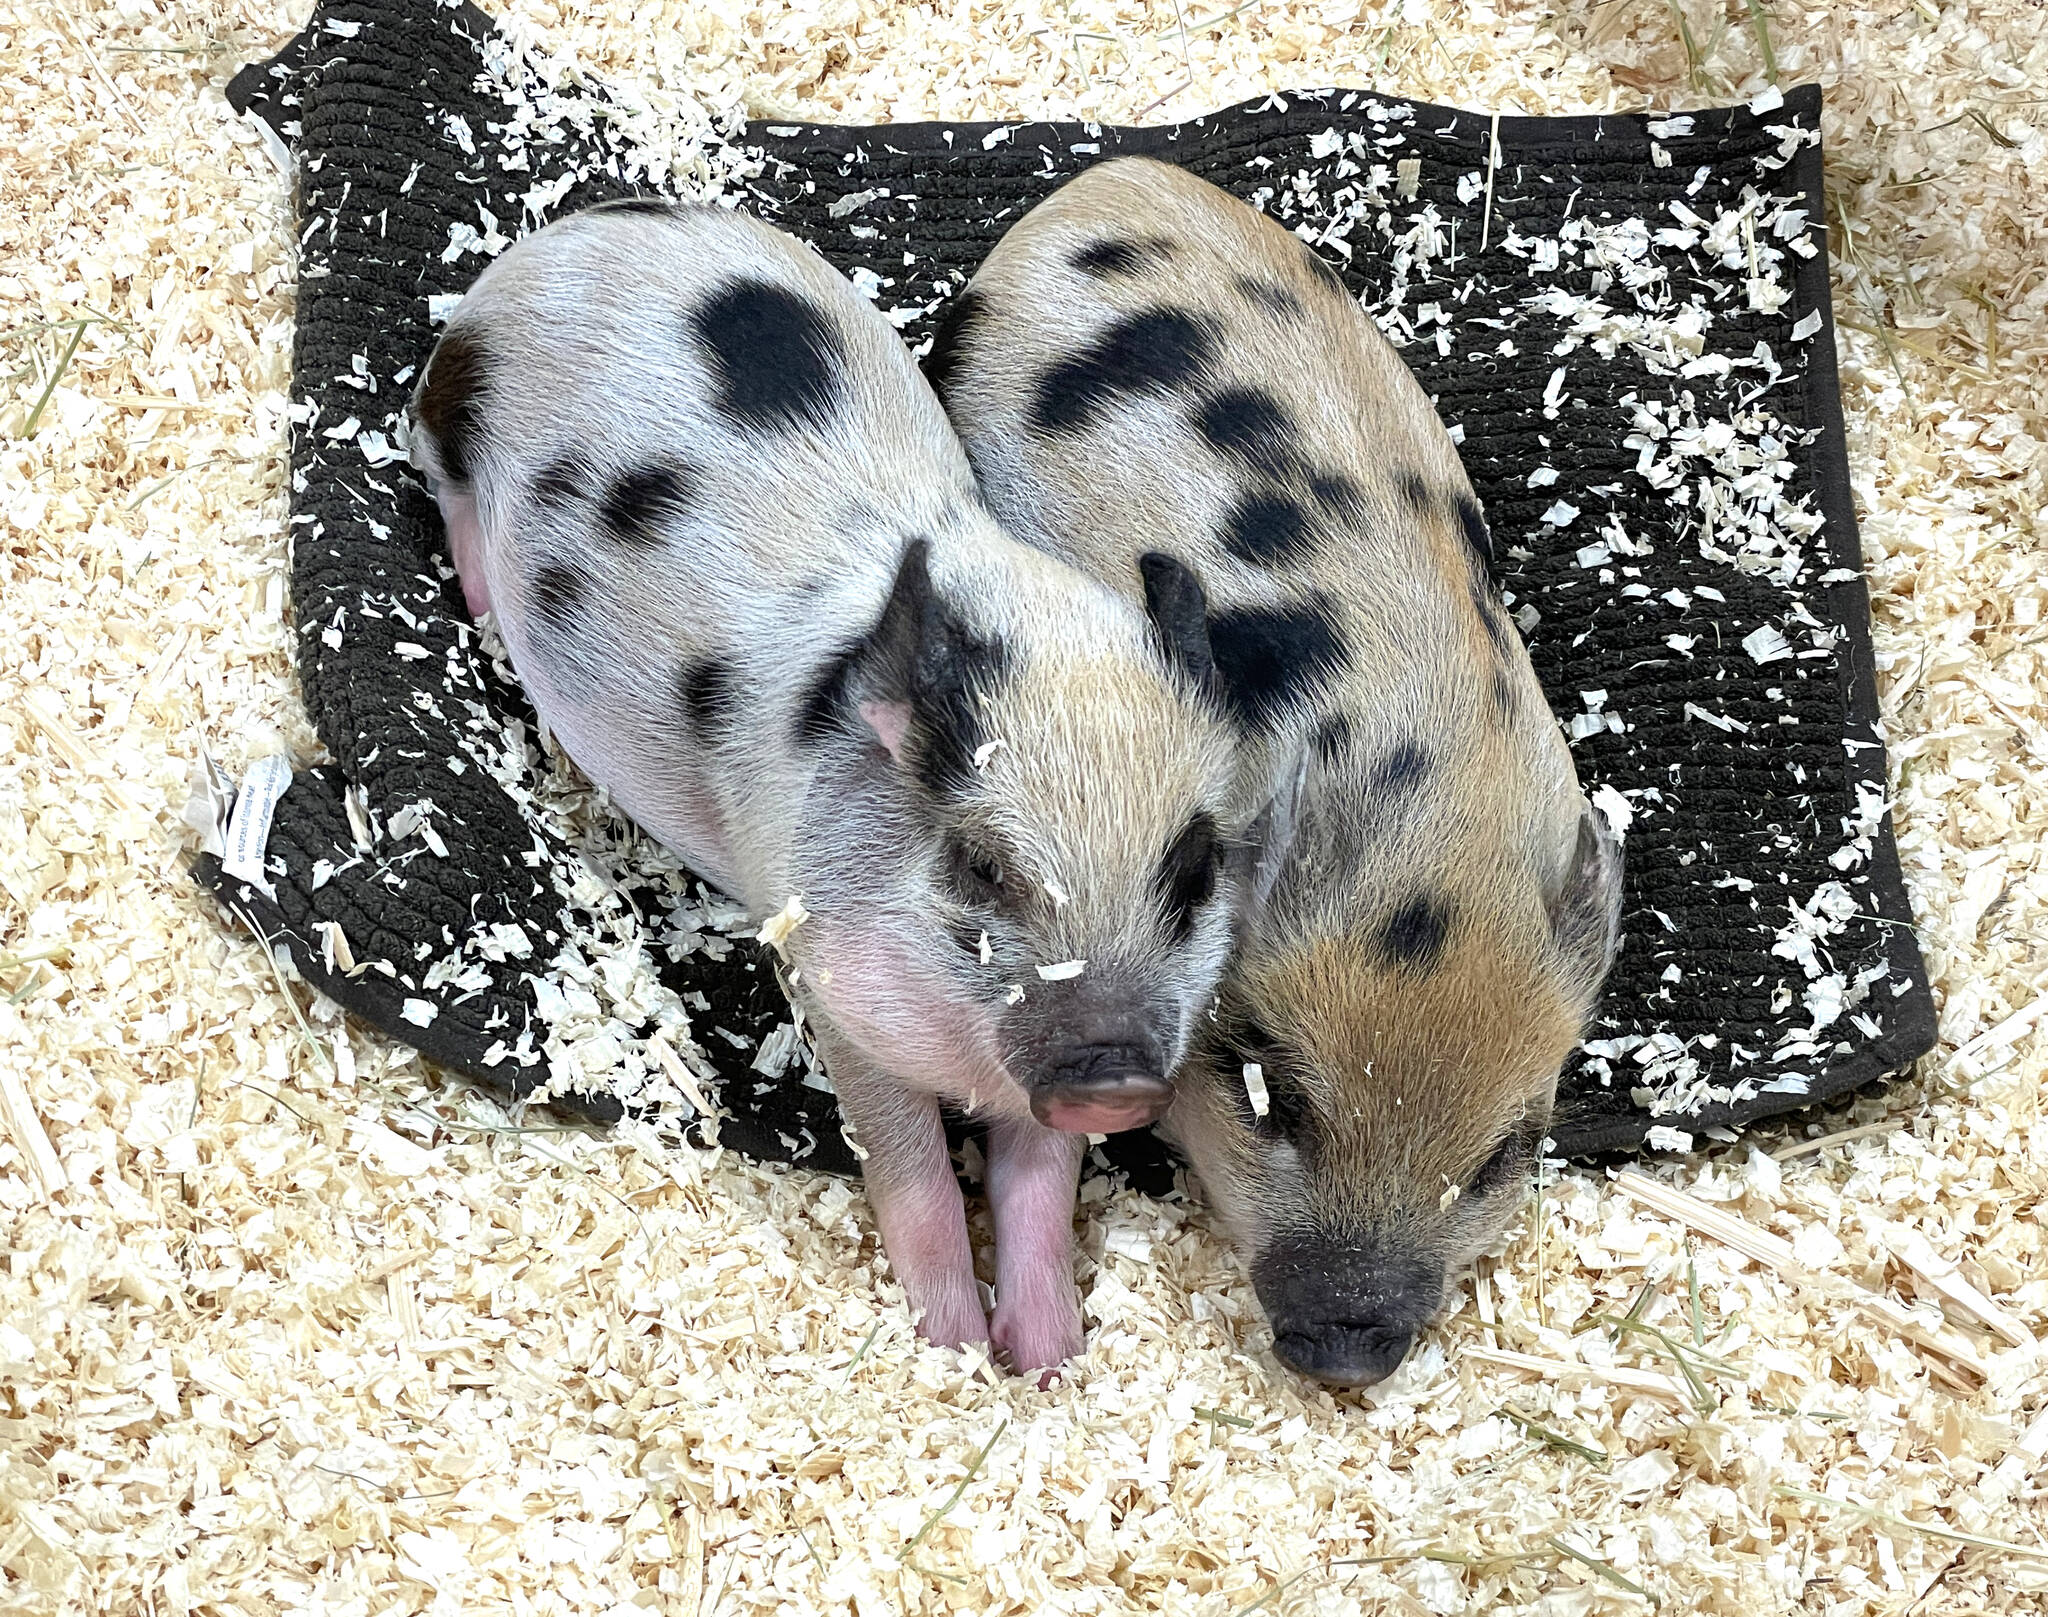 Two cute piglets napped as families looked at them in awe. (Photo by Kelsey Yates)